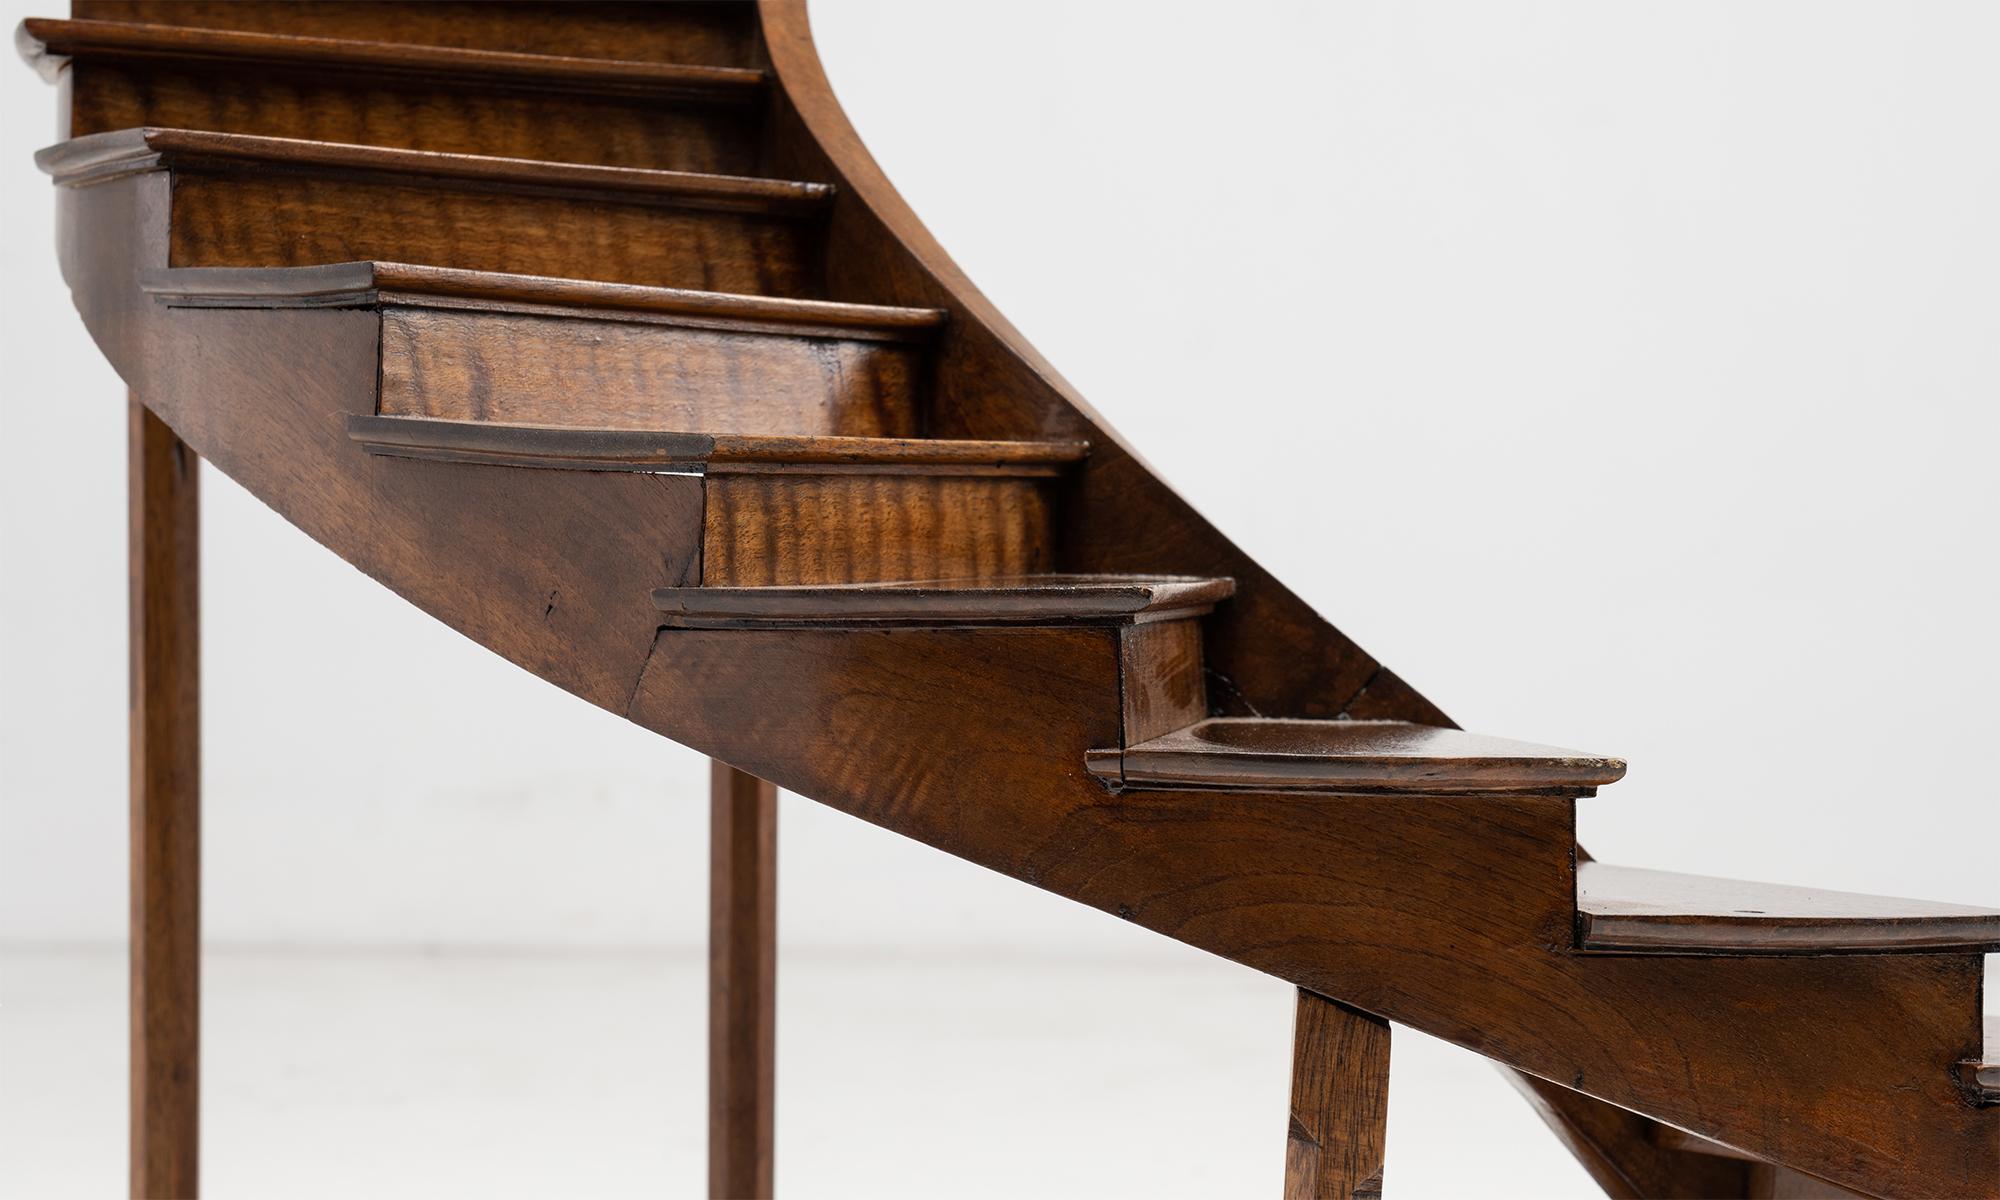 Walnut staircase model

England Circa 1890

Beautifully made spiral staircase, likely created by an apprentice woodworker as proof of concept for their design.

Measures: 28.25”W x 21.25”D x 22”H.